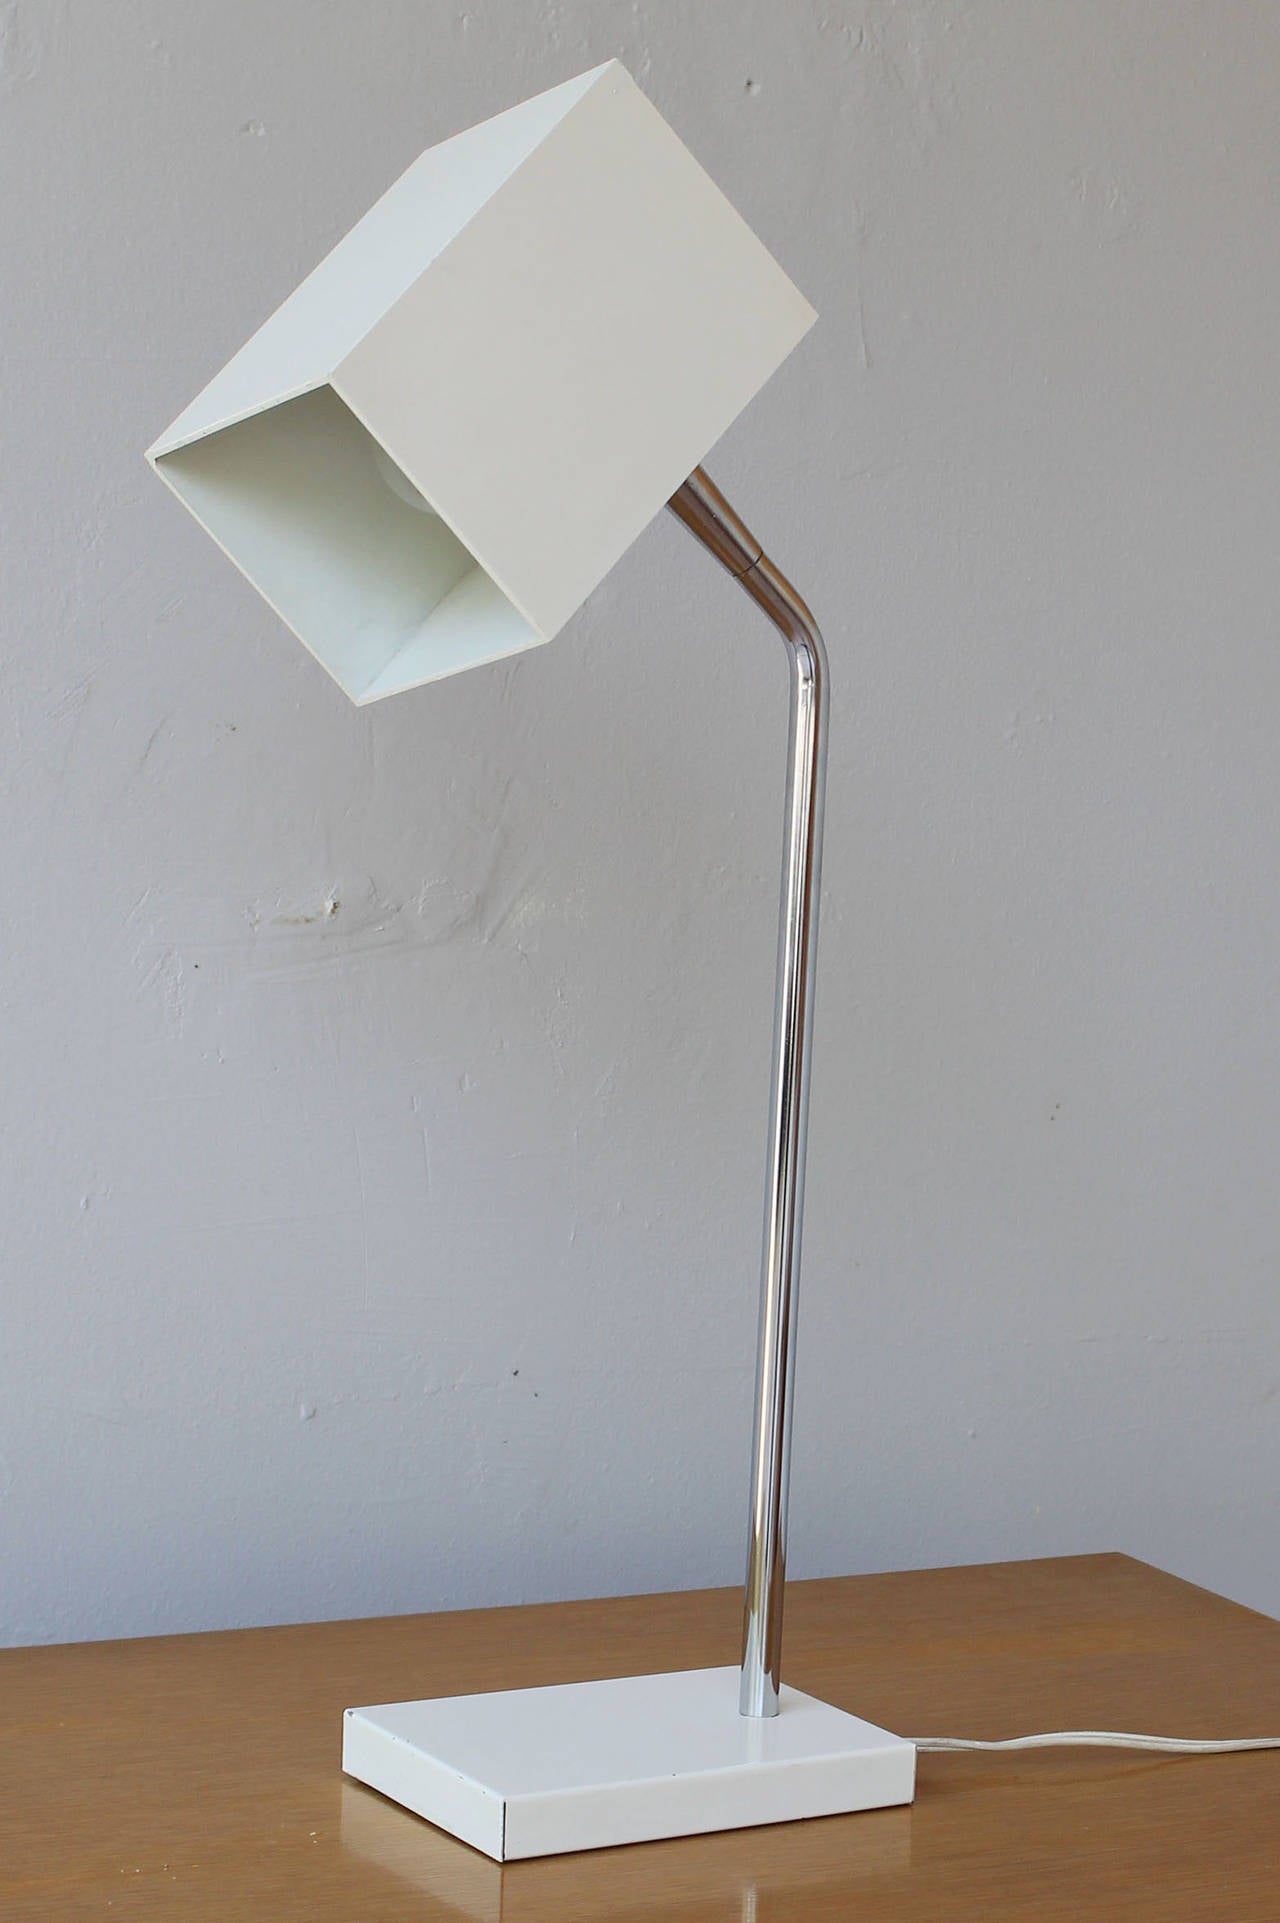 An early articulating chrome and enameled metal desk lamp by Robert Sonneman for Kovacs.